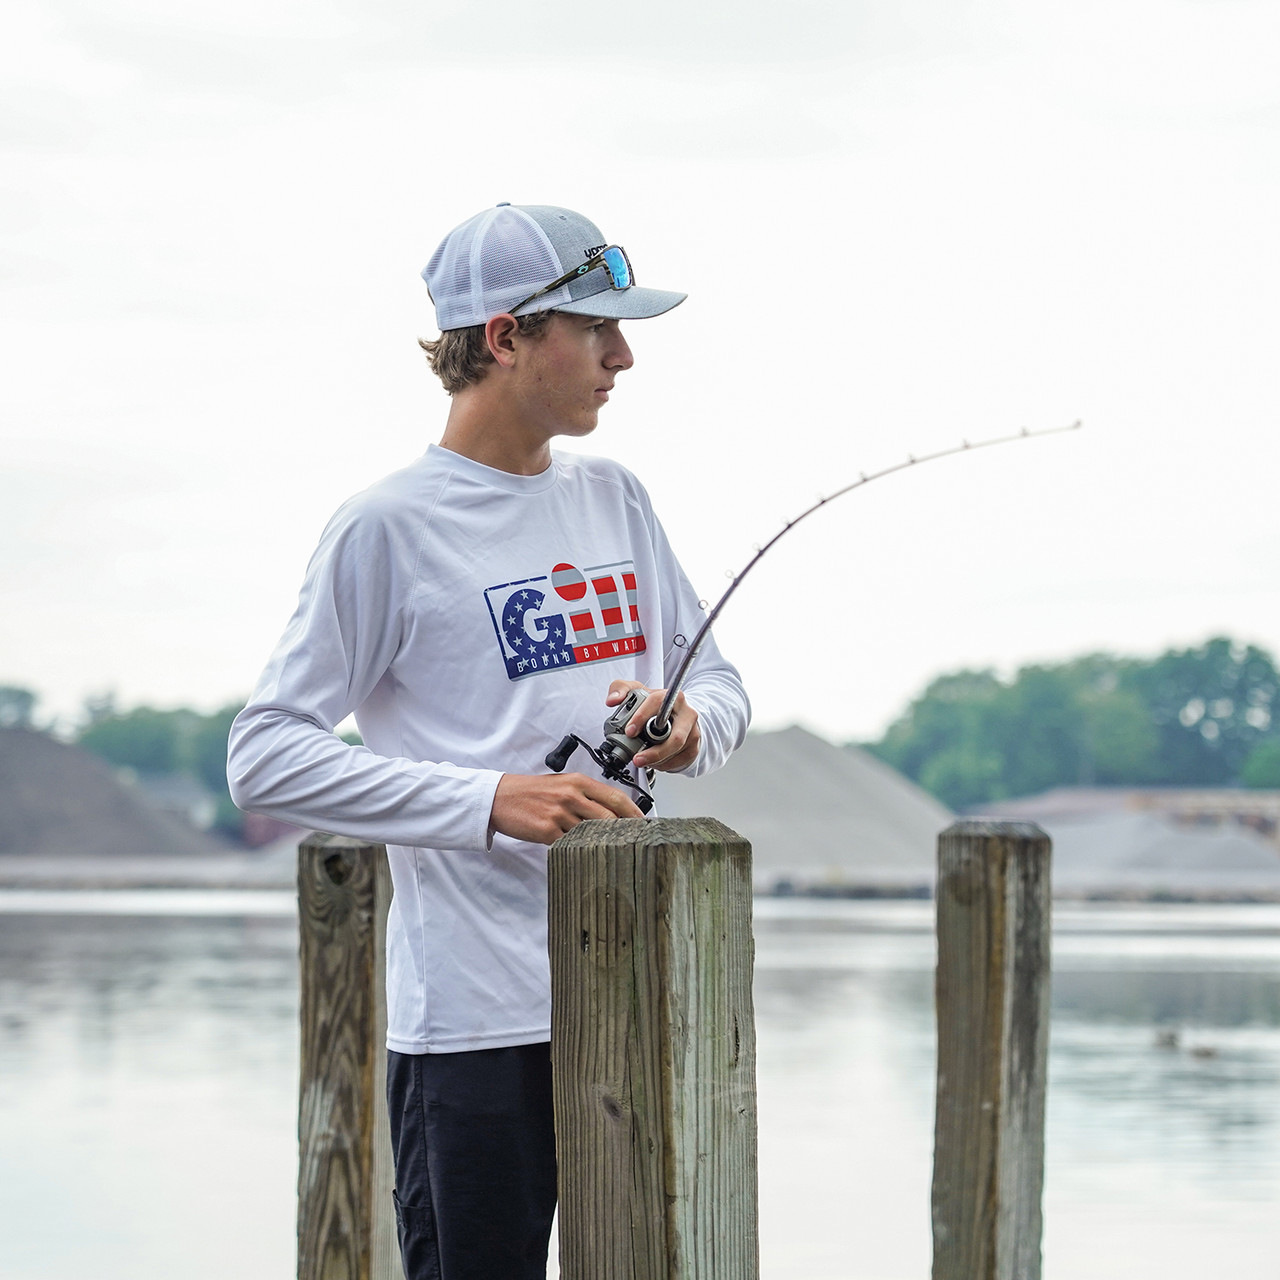 XPEL® Tec Long Sleeve Top in White - Gill Fishing